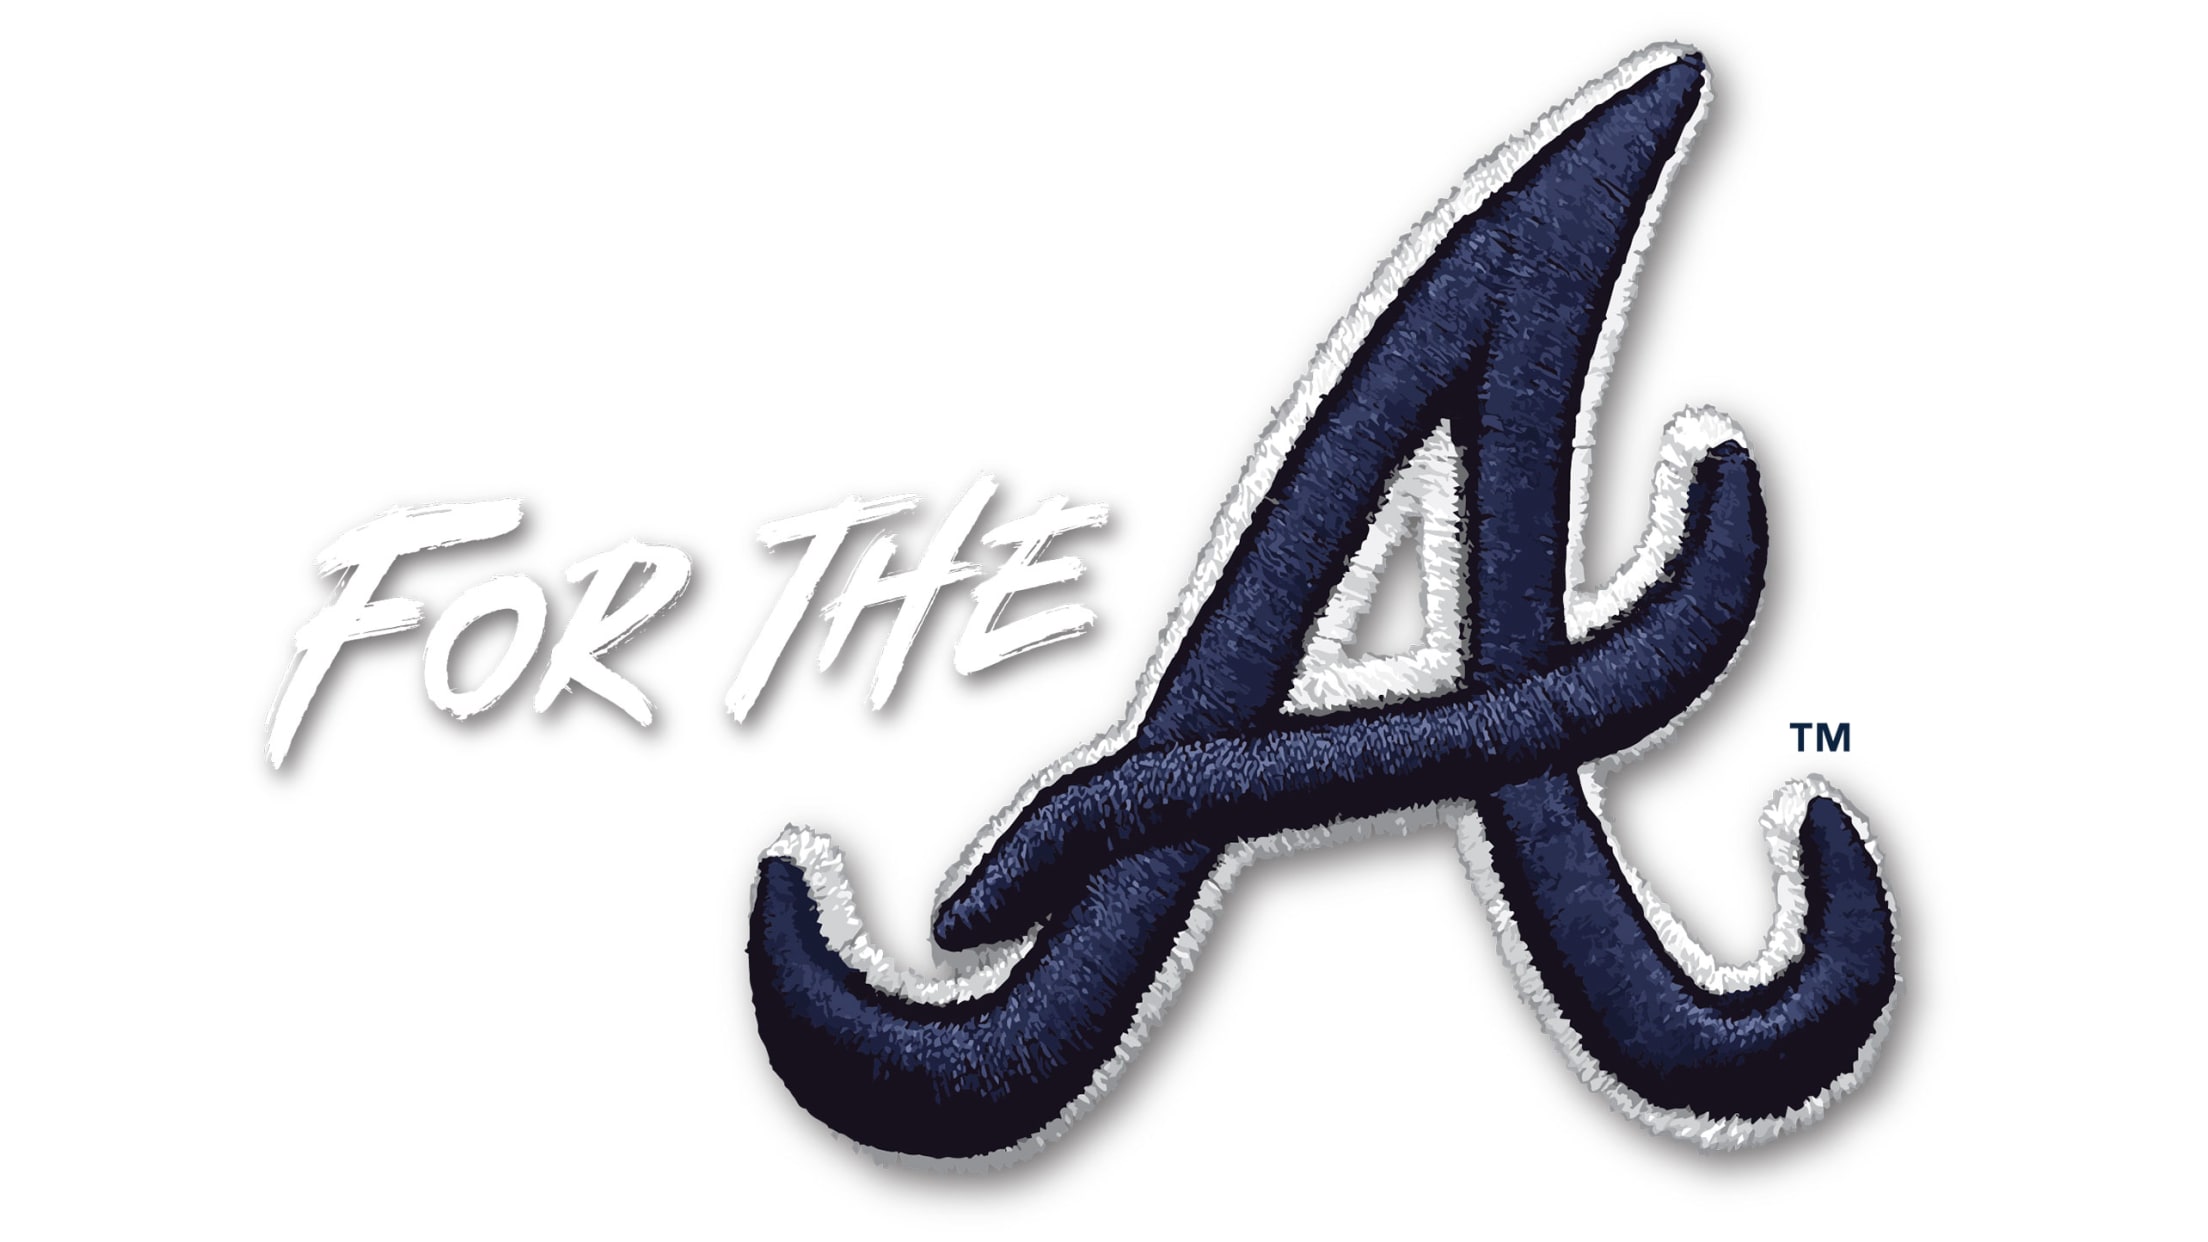 Atlanta Braves Wallpaper Atlanta Braves Wallpaper with the